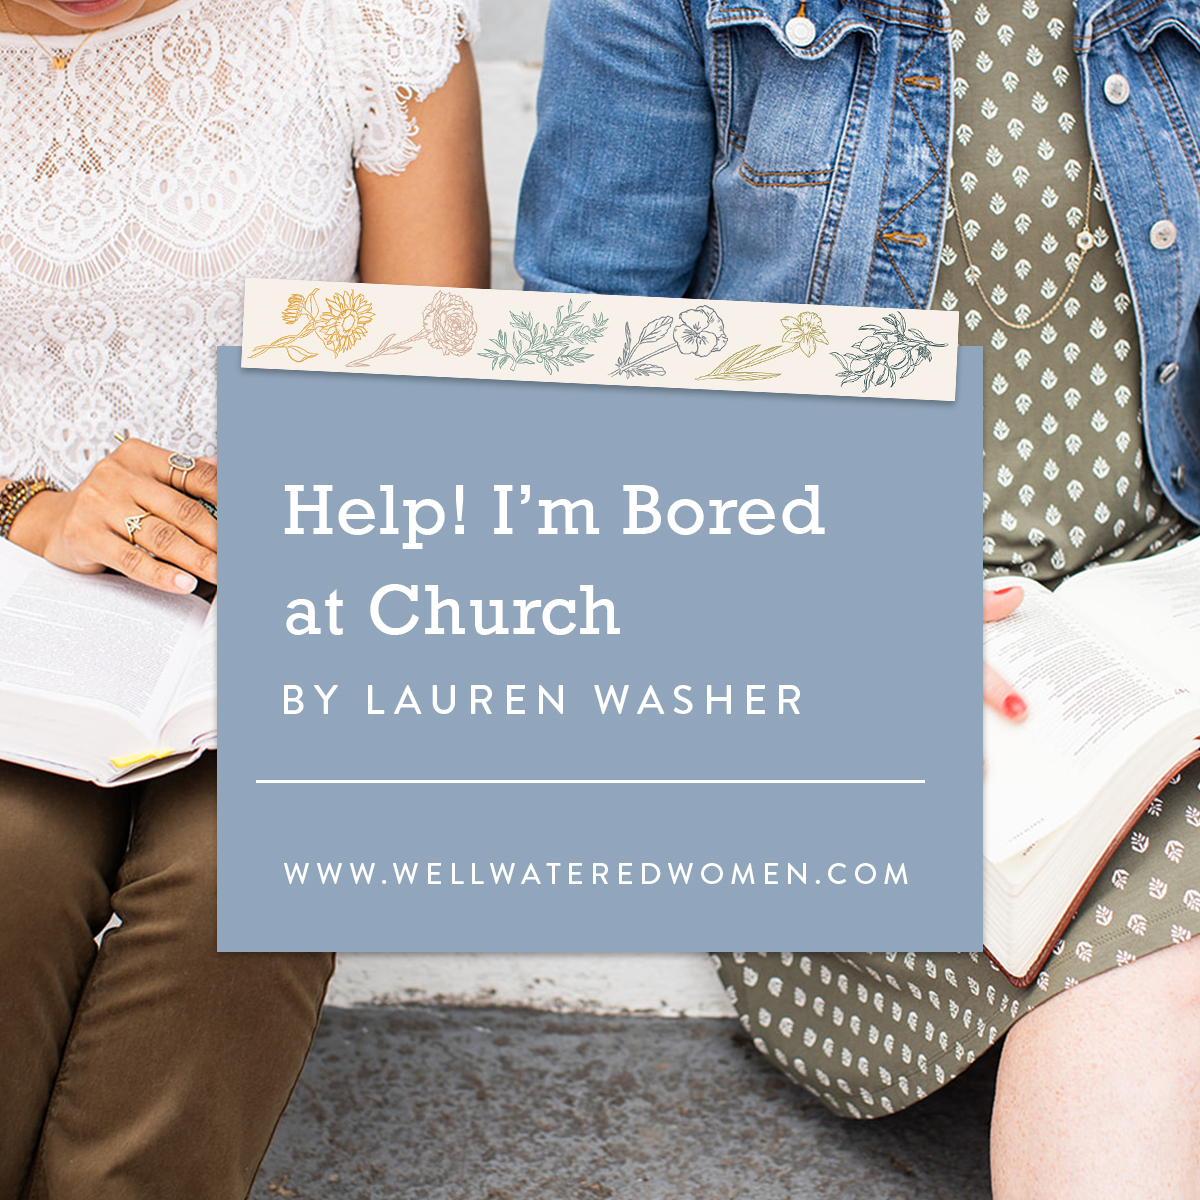 Help! I'm Bored at Church–An Article by Well-Watered Women